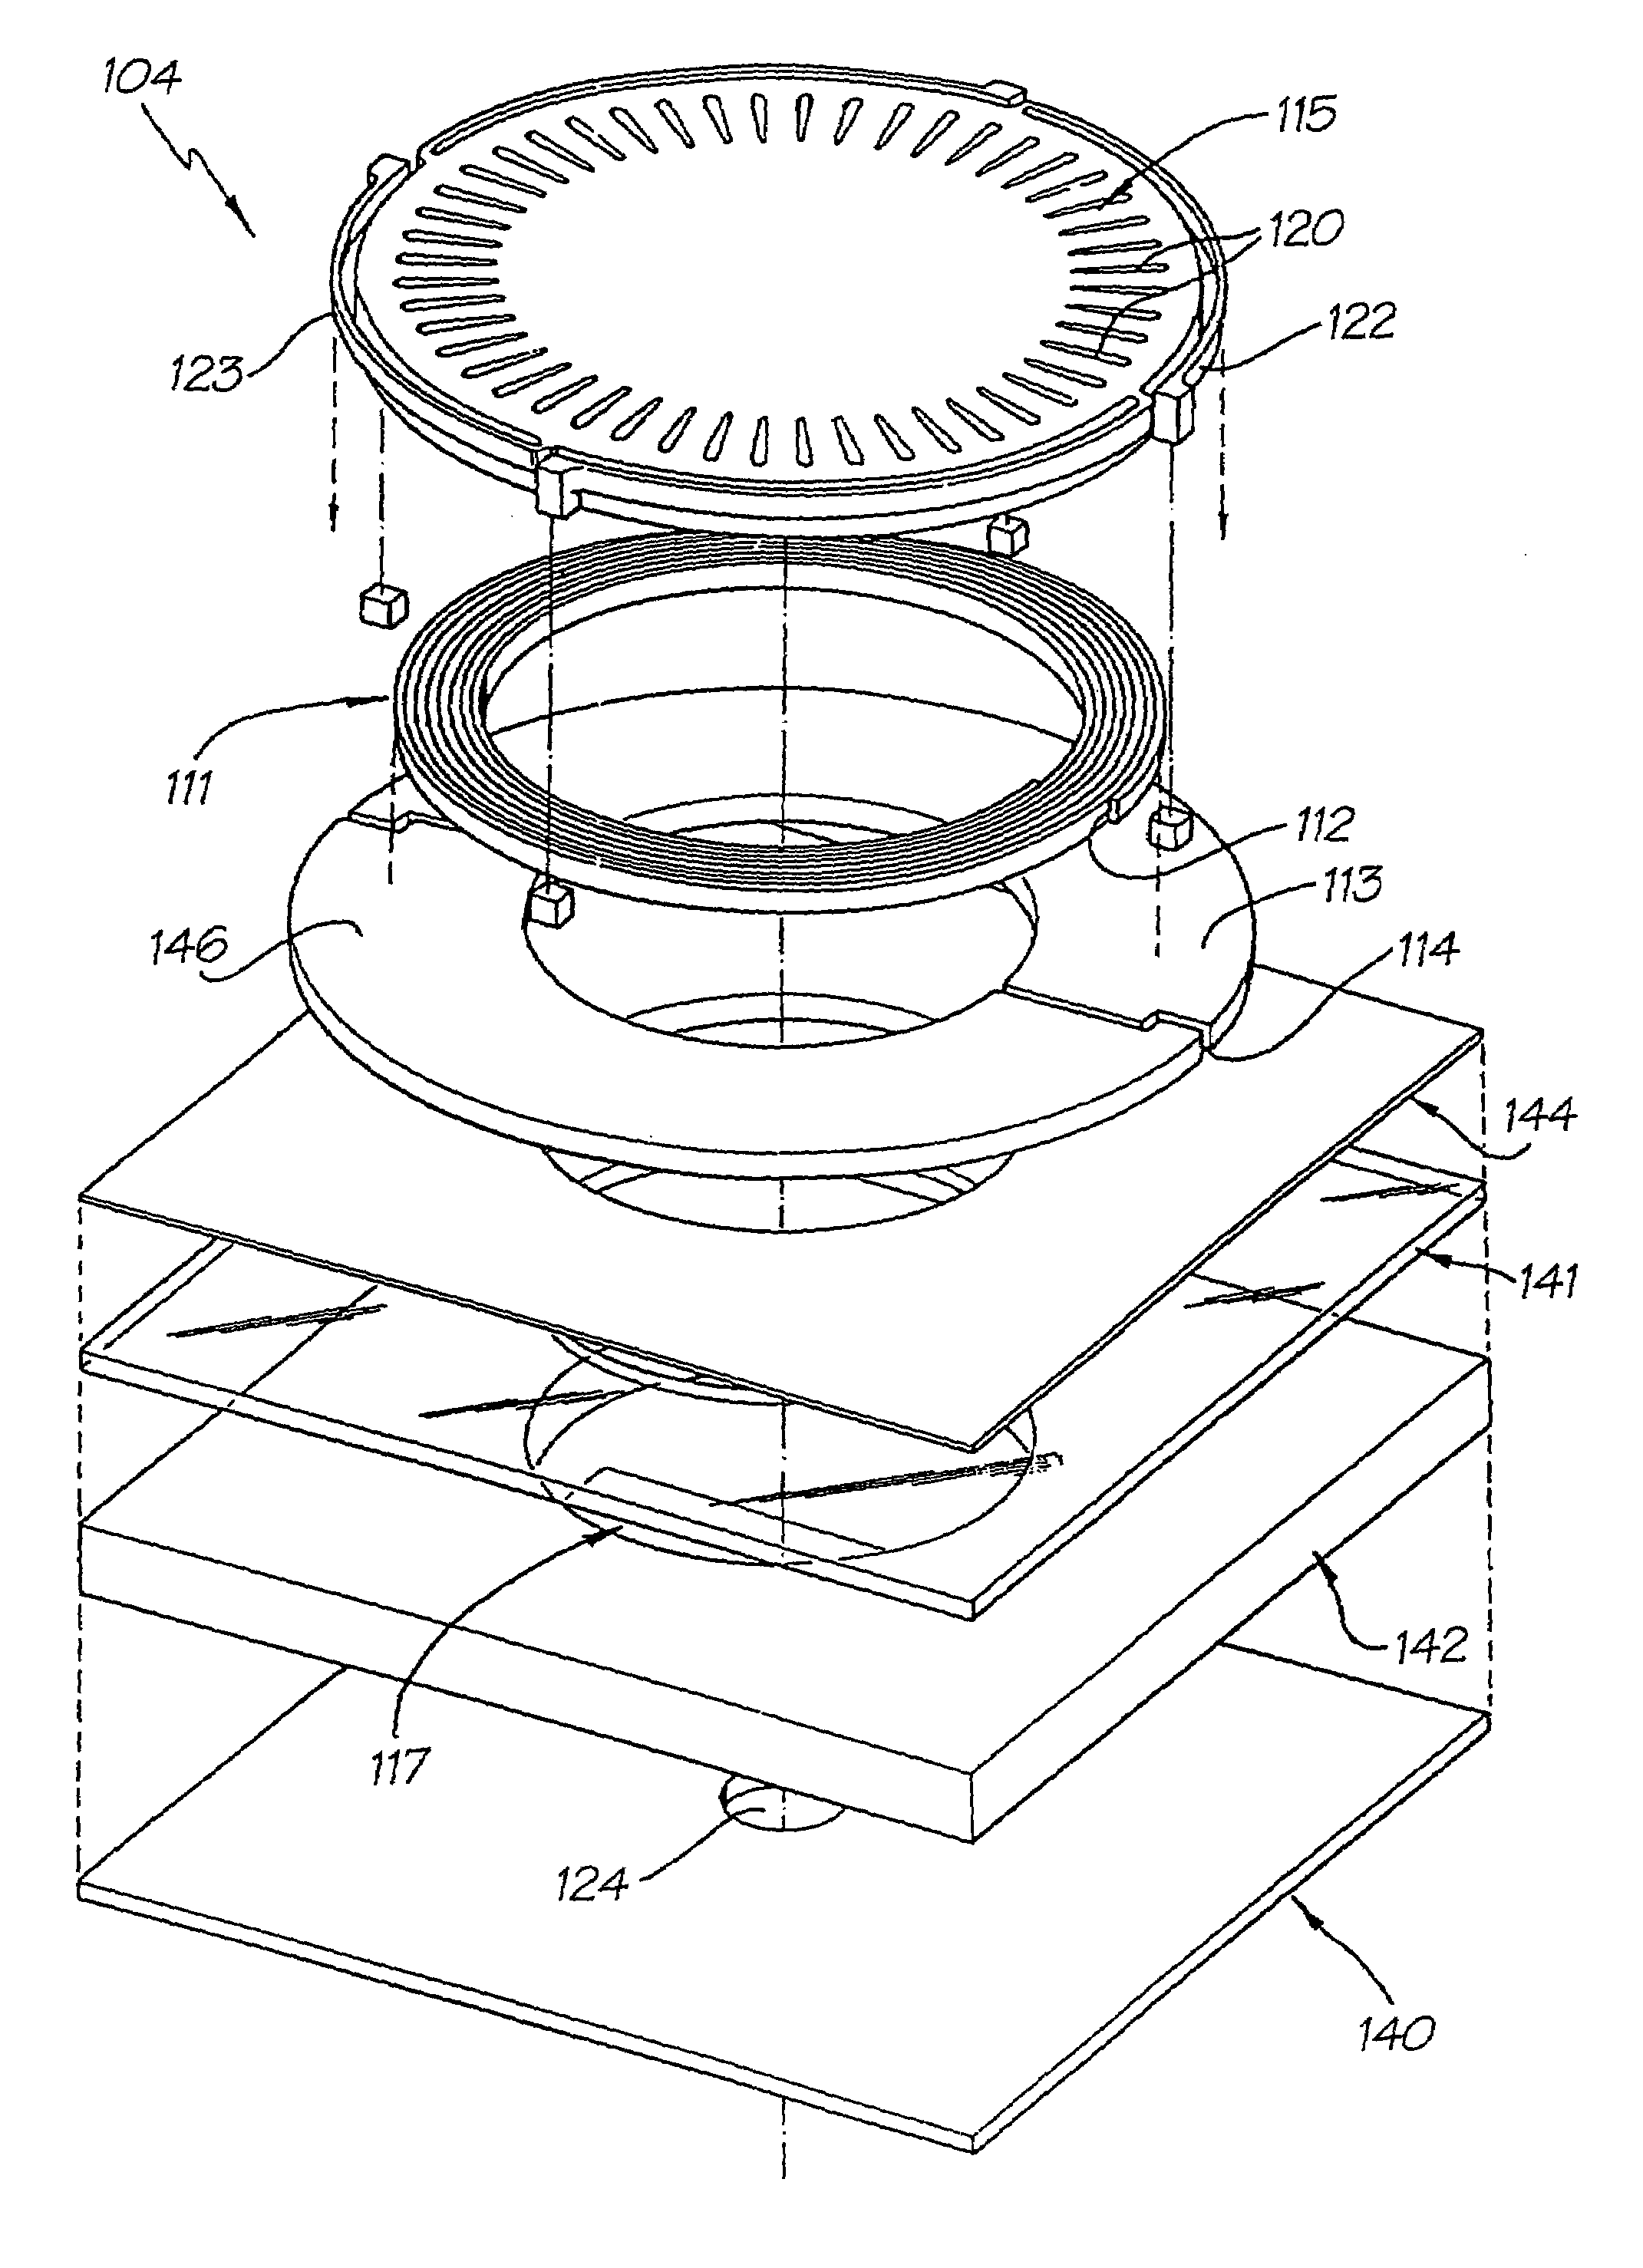 Inkjet nozzle chamber holding two fluids